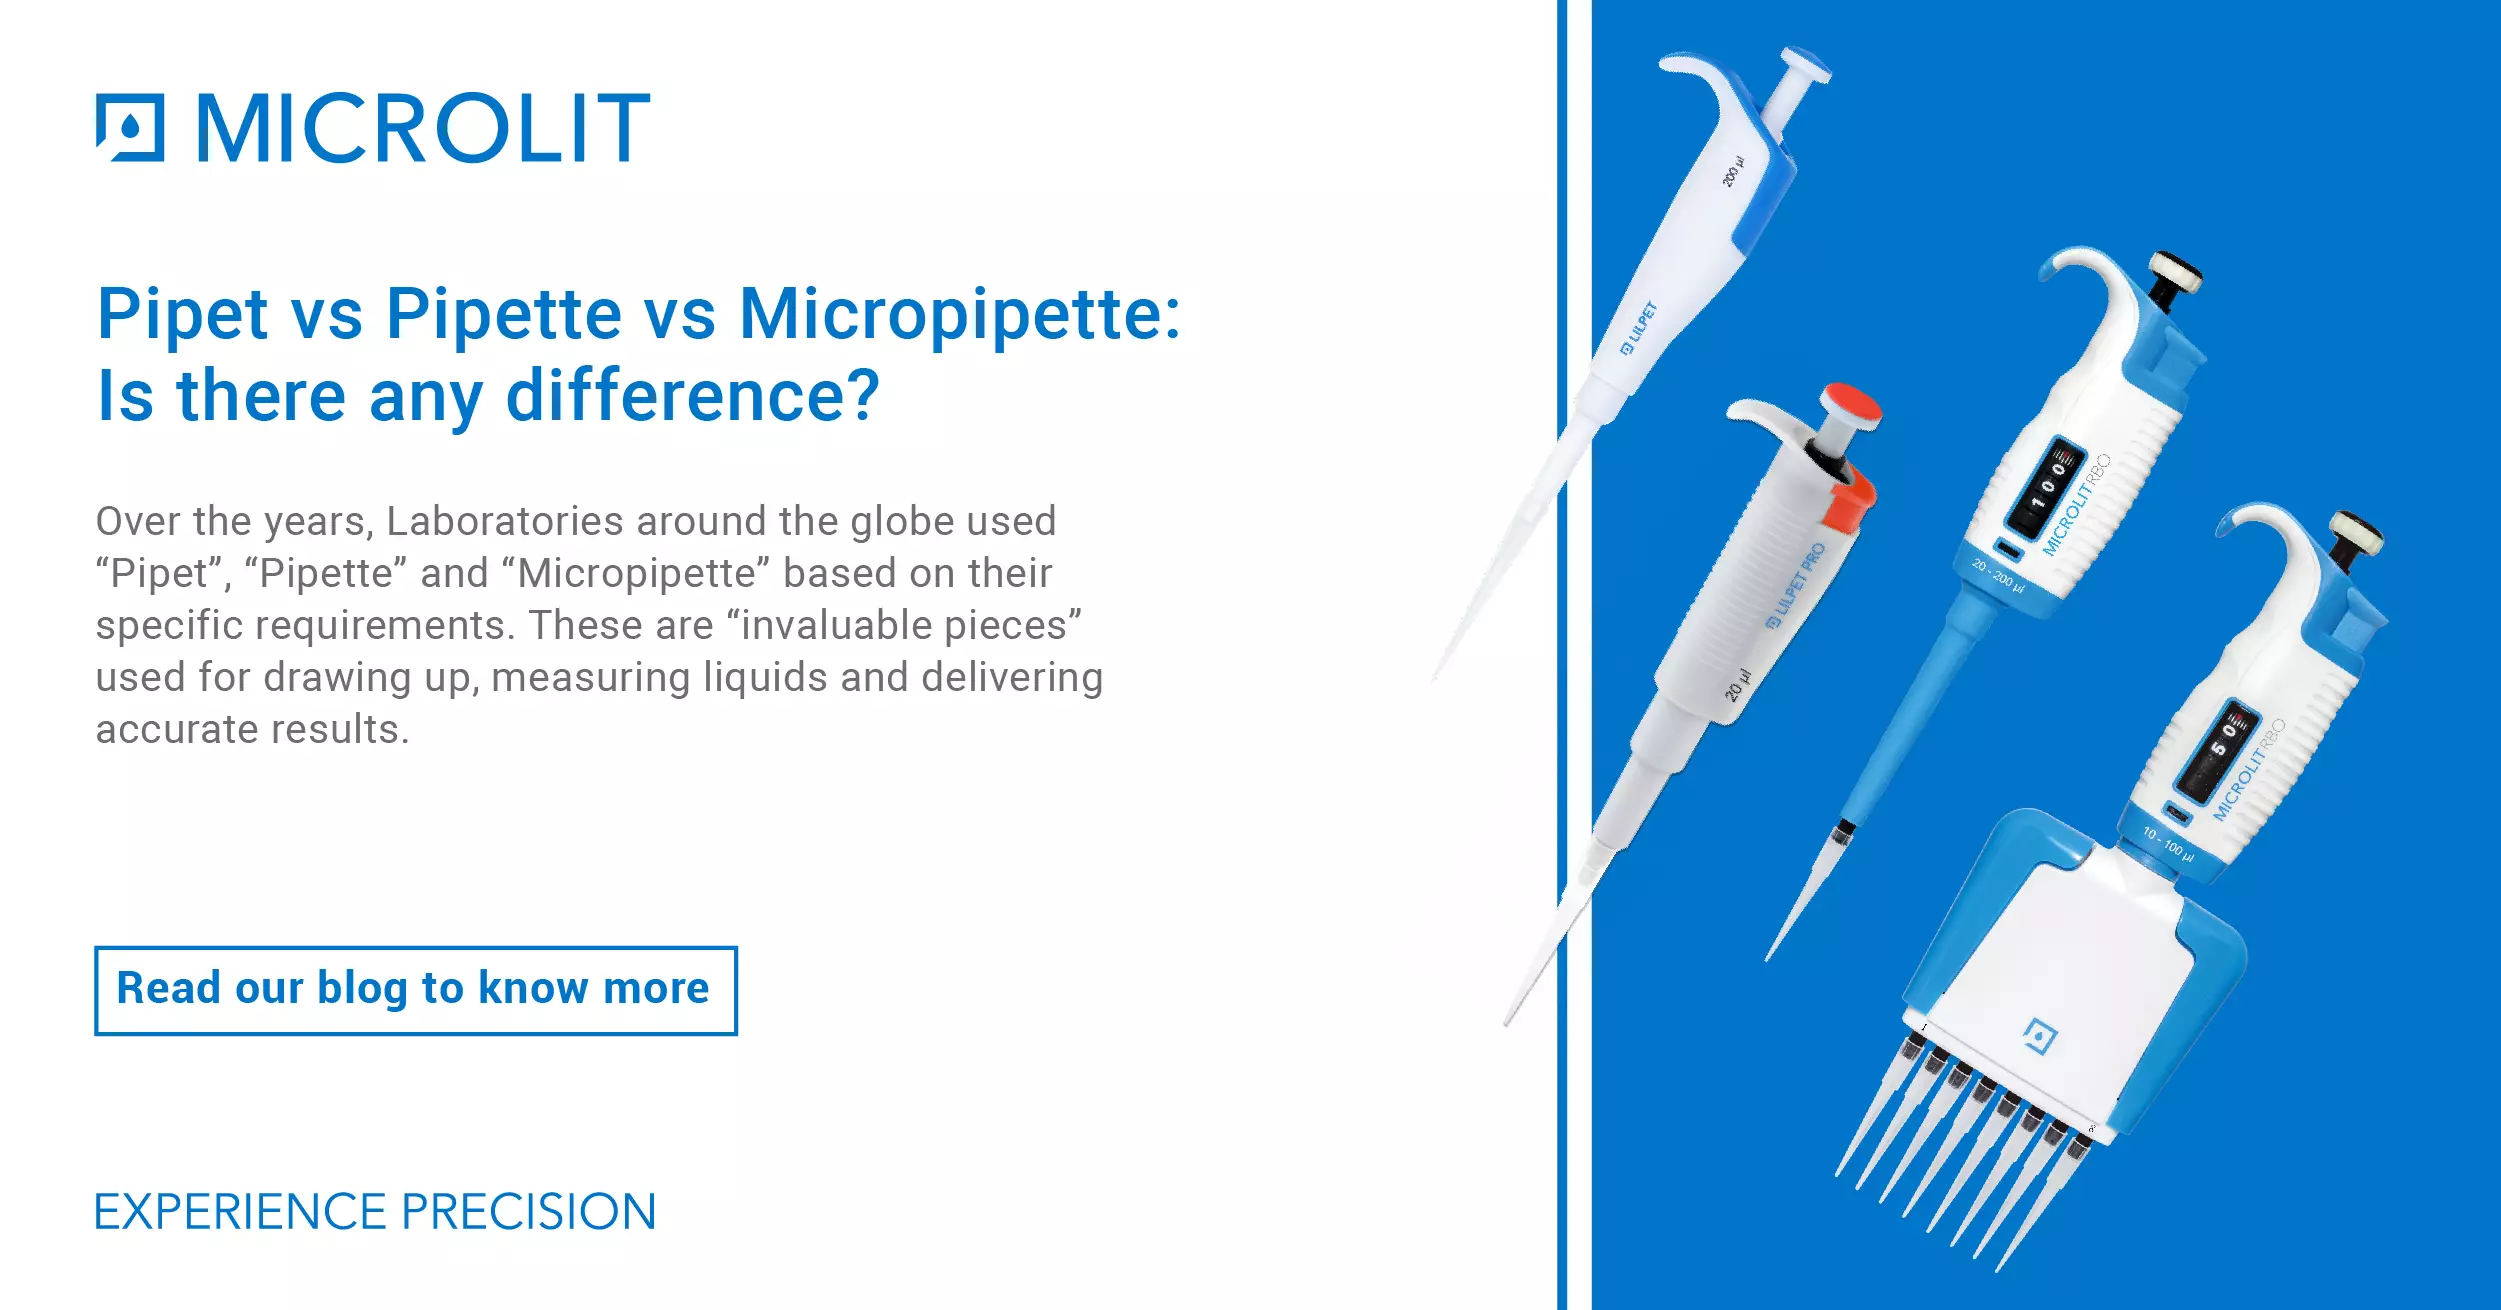 Pipet vs Pipette vs Micropipette: Is there any difference?